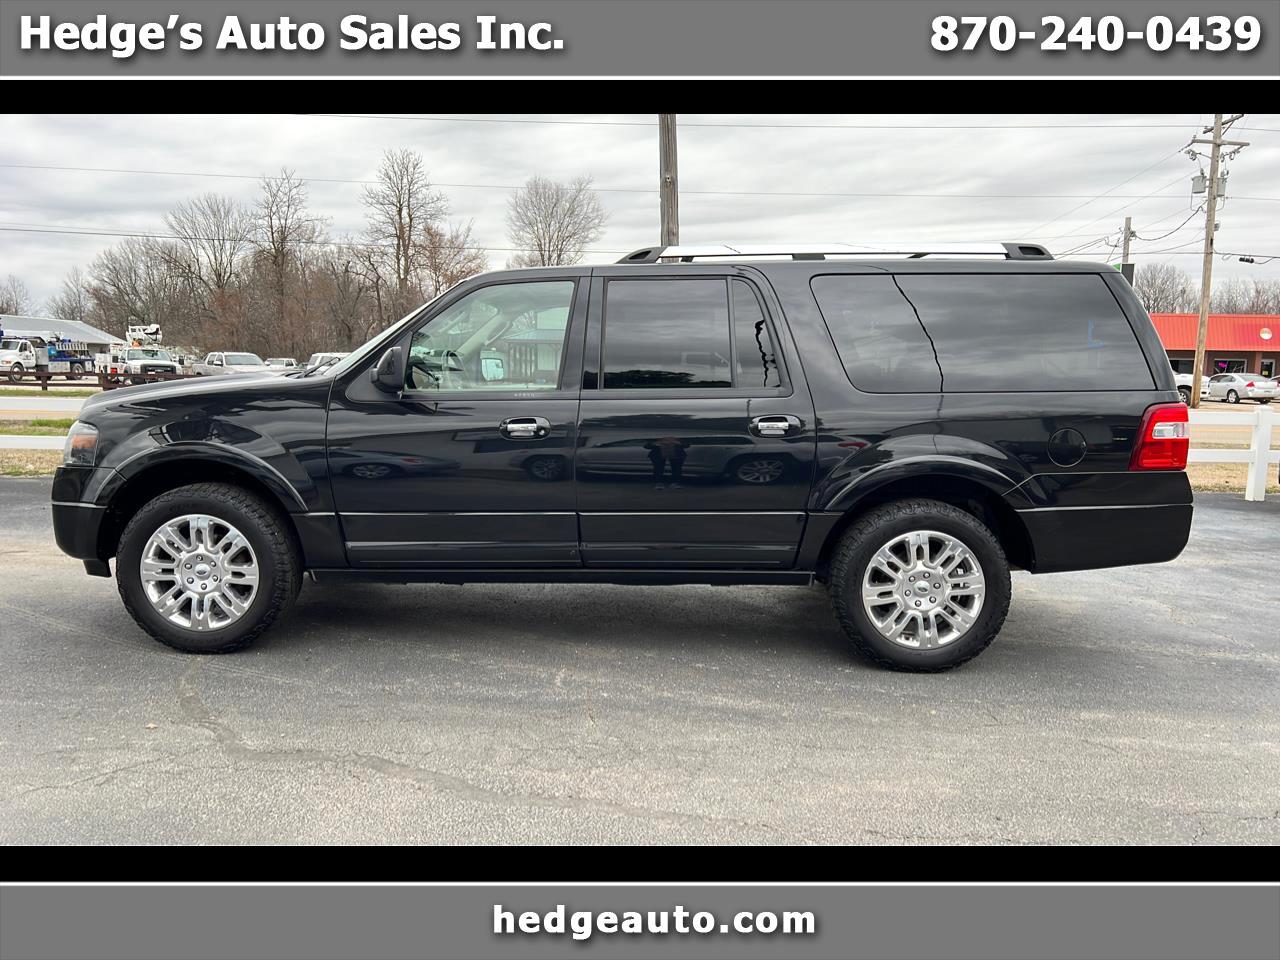 Used 2014 Ford Expedition EL Limited 4WD for Sale in Paragould AR 72450  Hedge's Auto Sales Inc.